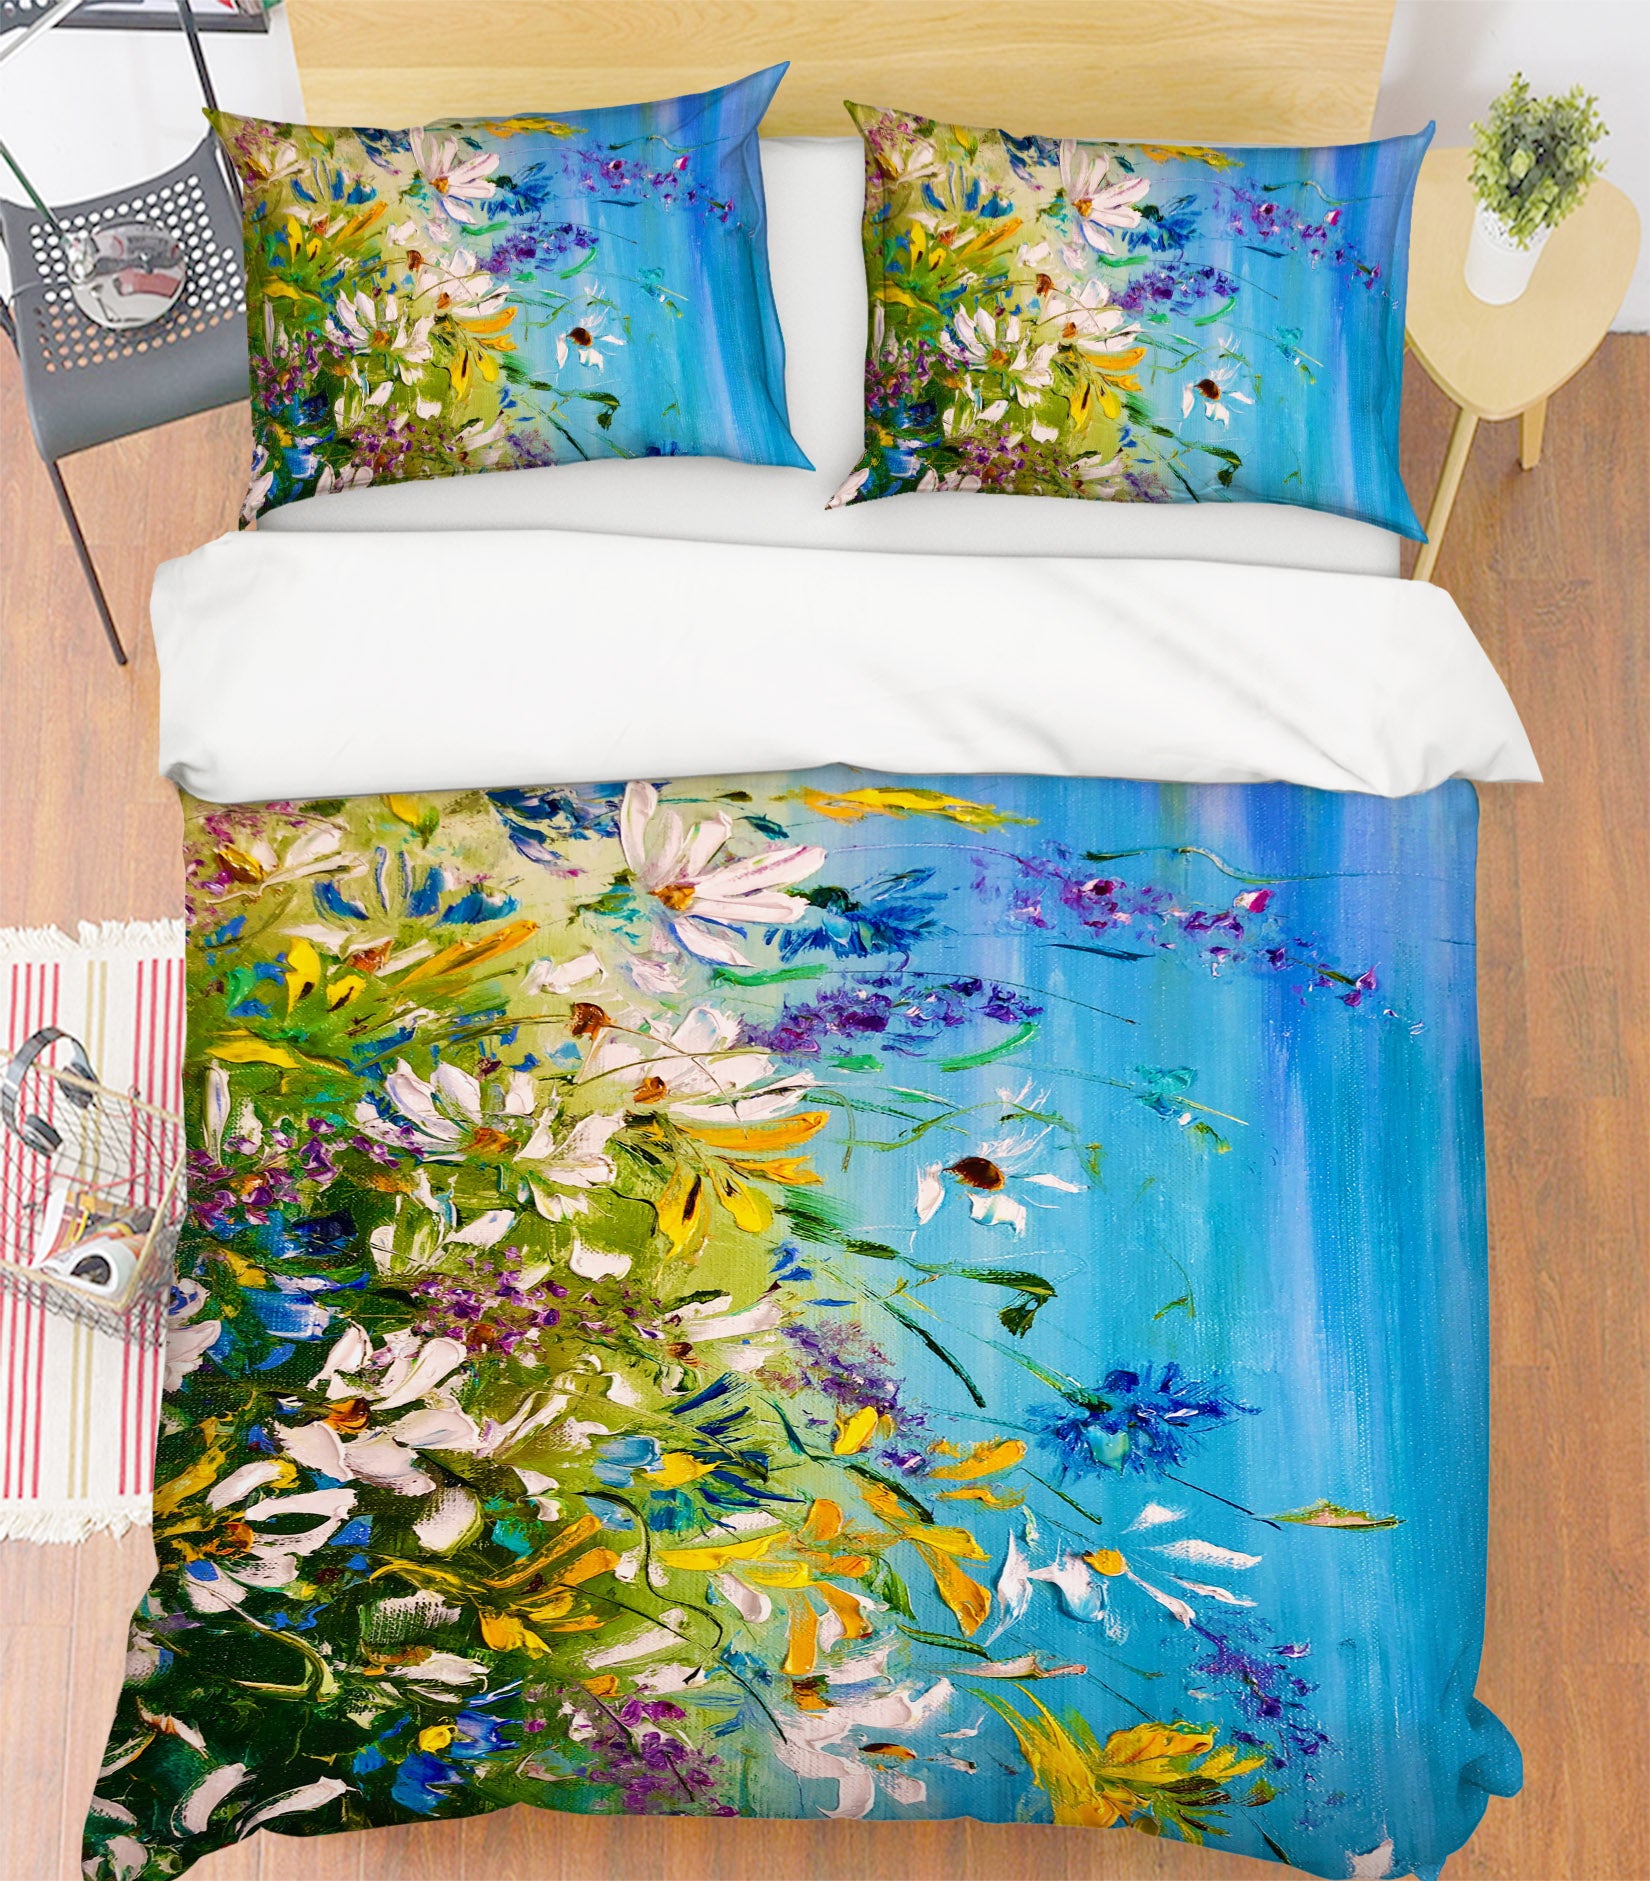 3D Colorful Daisies 584 Skromova Marina Bedding Bed Pillowcases Quilt